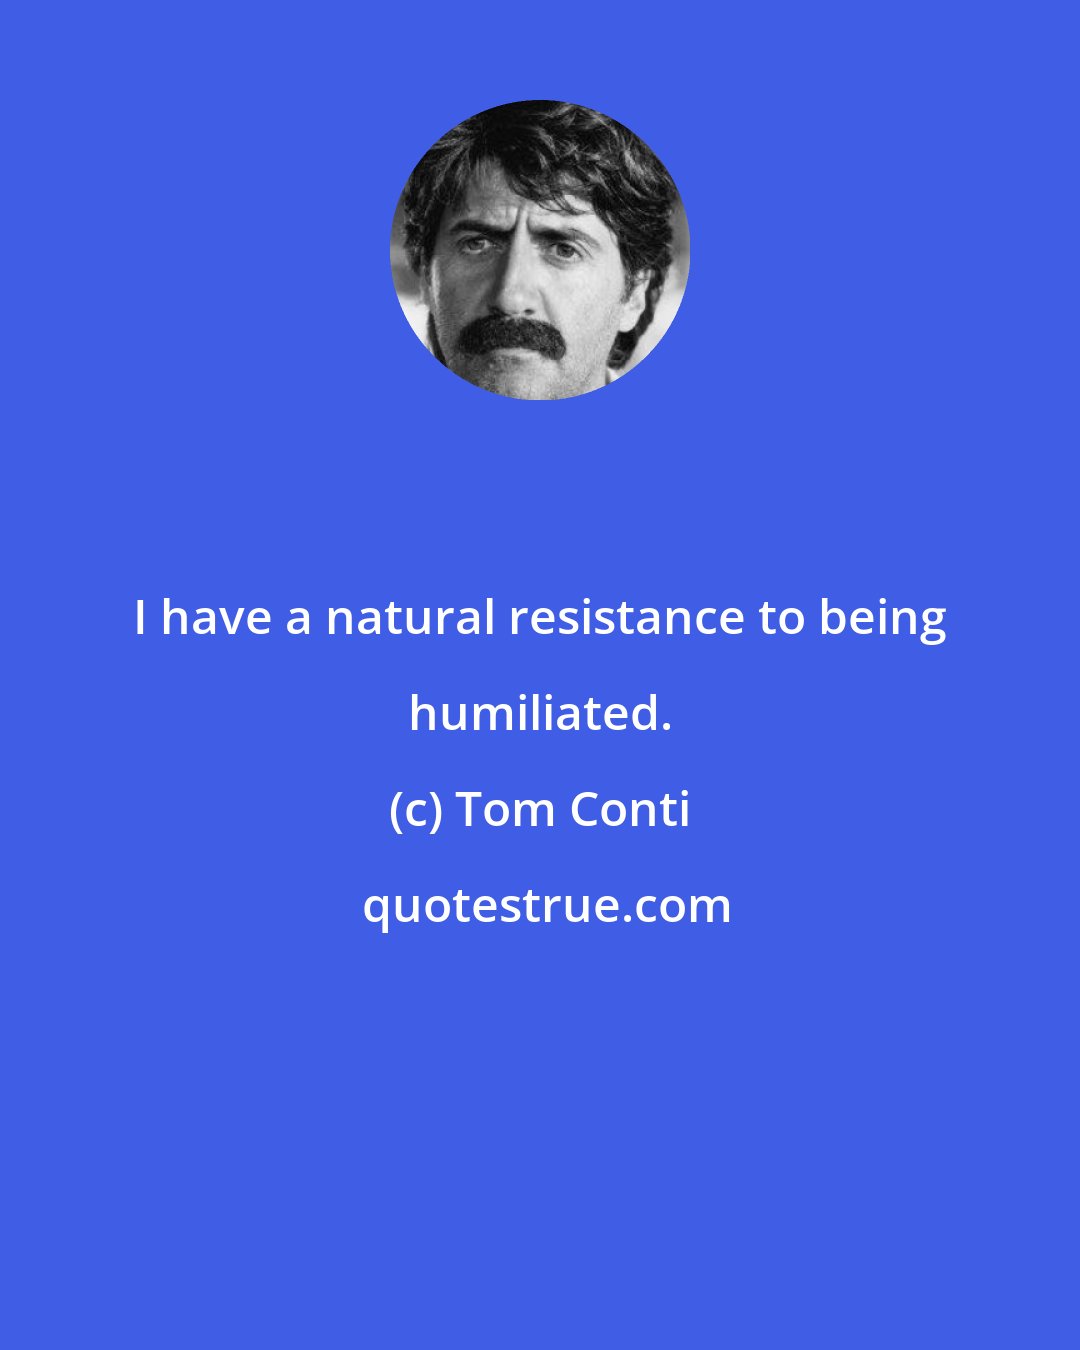 Tom Conti: I have a natural resistance to being humiliated.